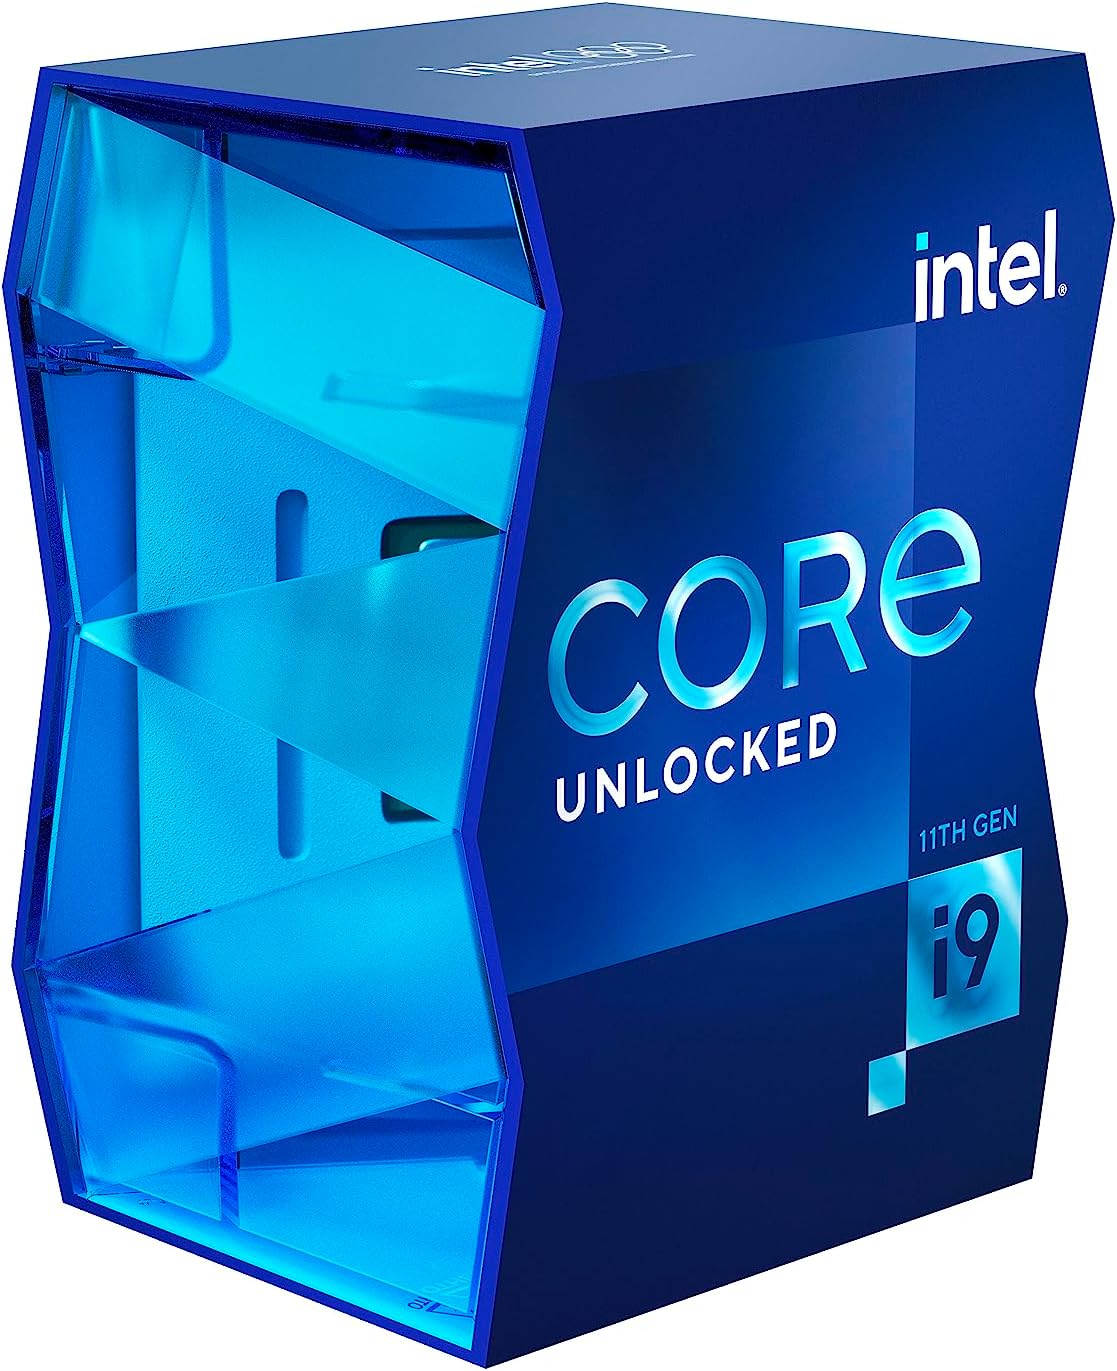 Intel Core i9-11900K CPU supporting DDR4 memory speeds up to 3200MHz 675901933735D